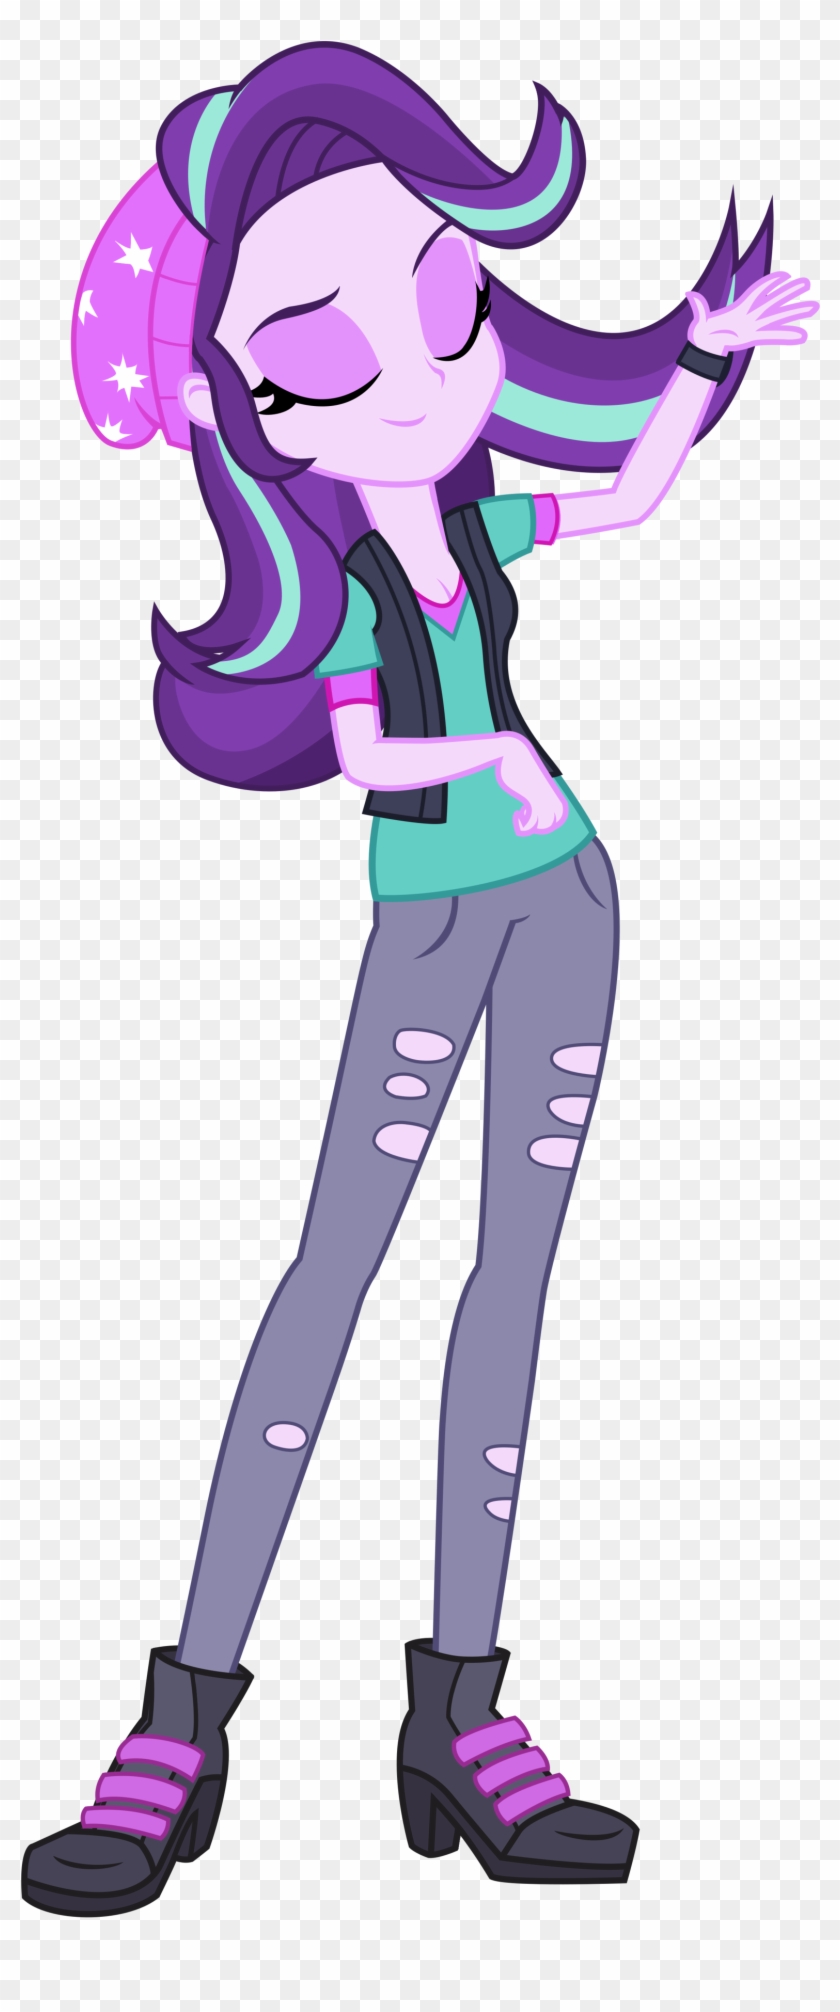 From Equestria Girls Special "mirror Magic" Starlight - My Little Pony Equestria Girls Twilight Sparkle #1087234